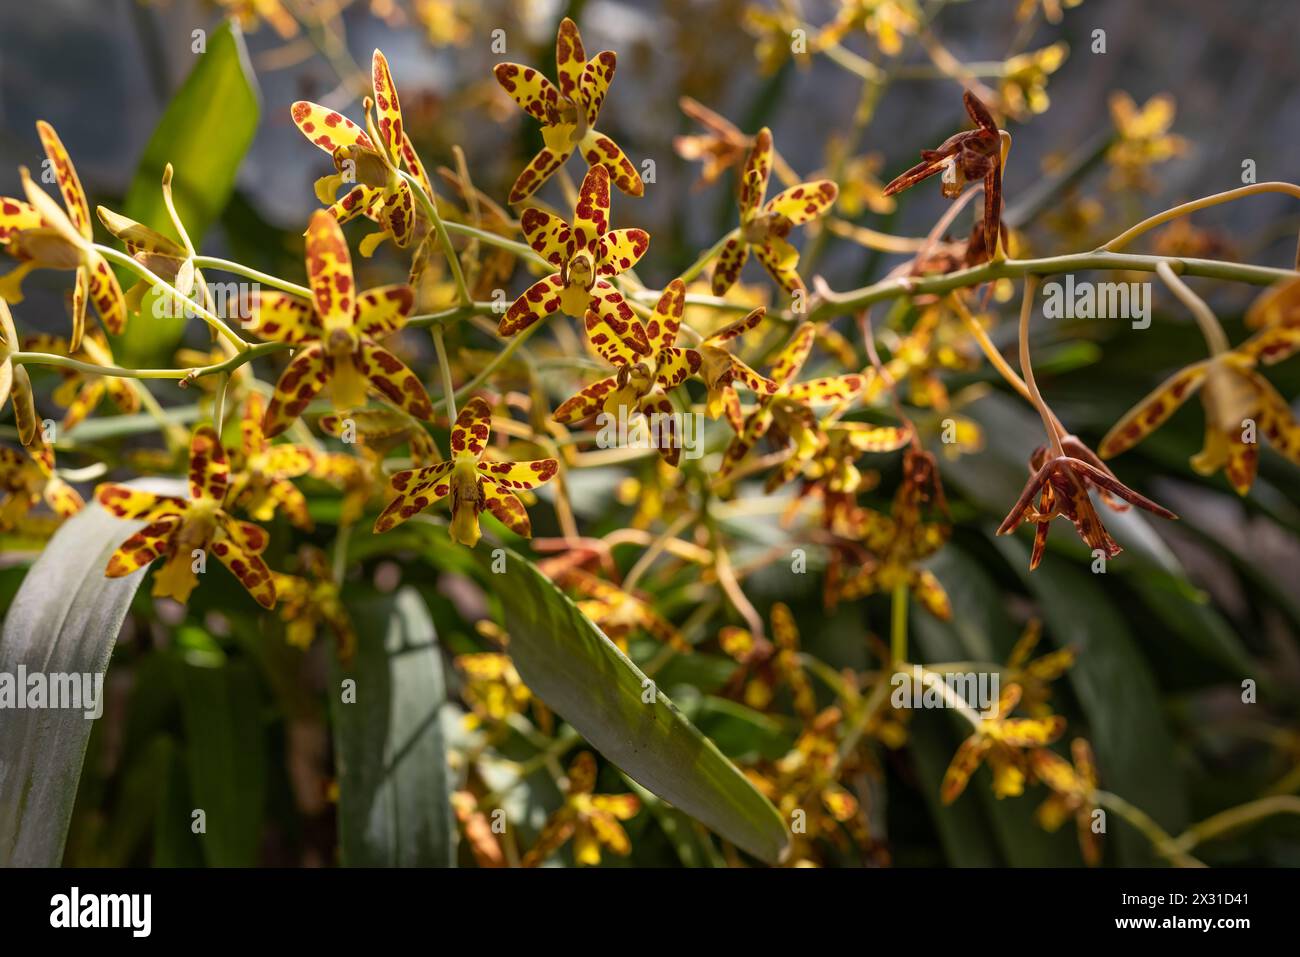 Yellow orchid flowers in a greenhouse. Sunlit Crucifix Orchid, Fiery Reed Orchid, Reed-stem Orchid or Spice Orchid. Epidendrum ibaguense close-up. Tro Stock Photo